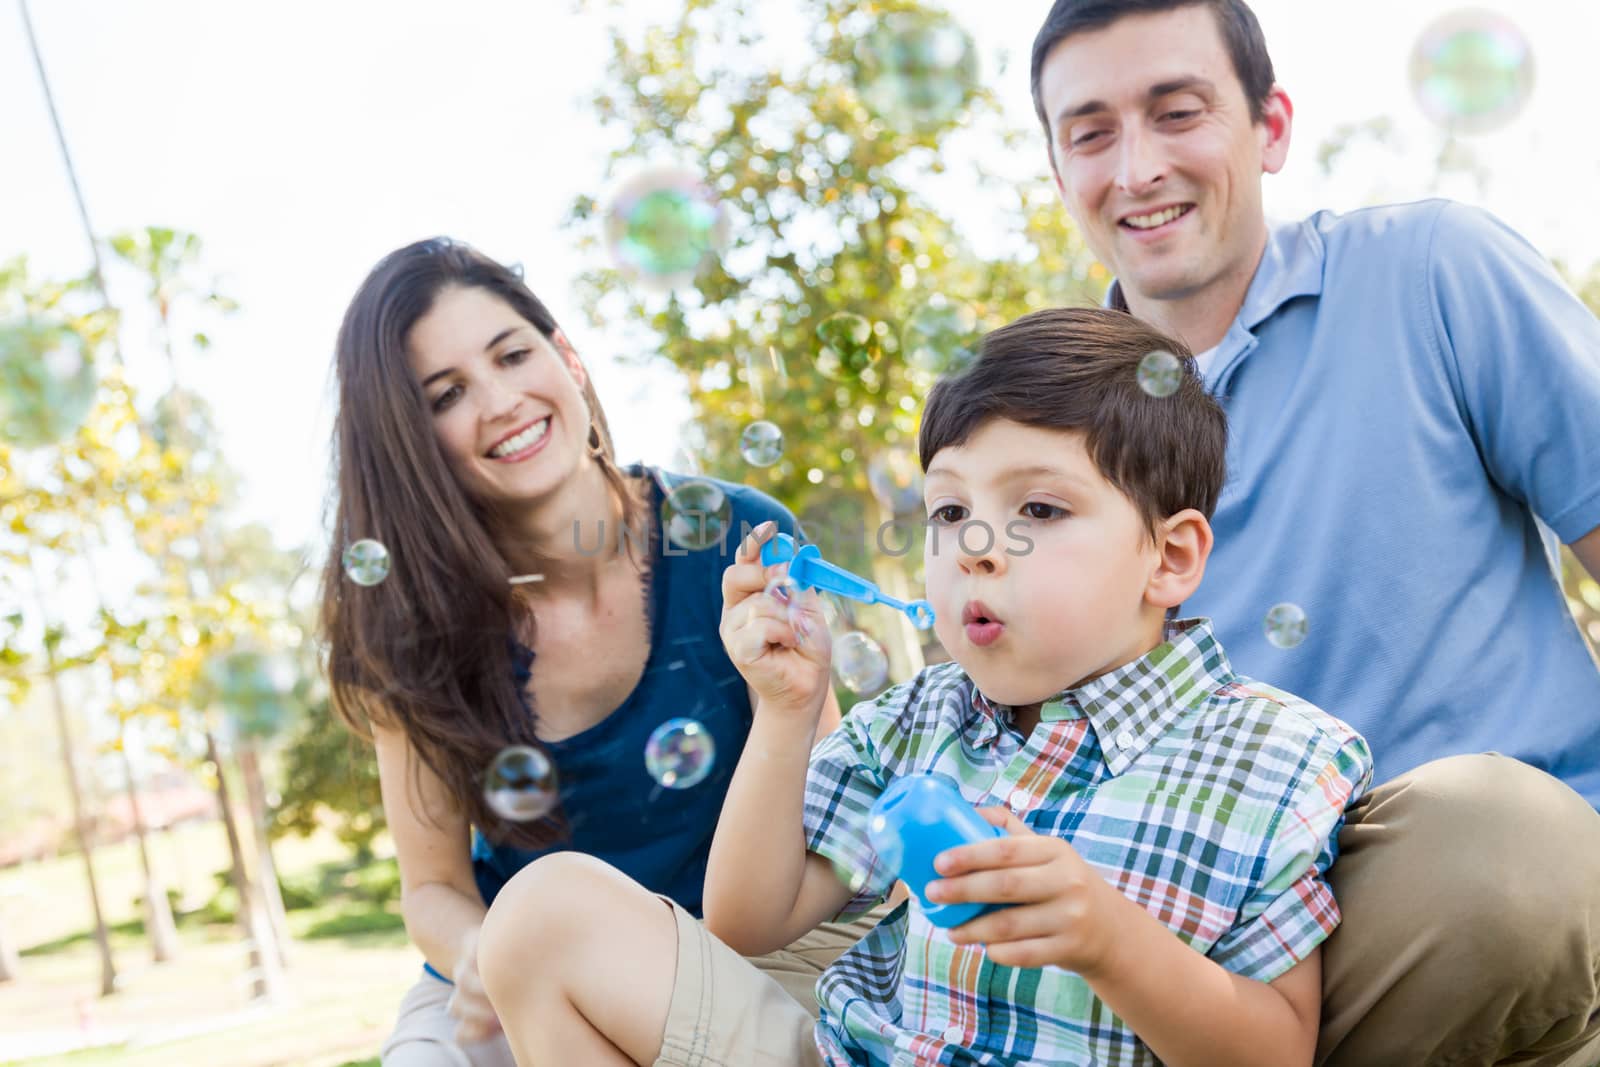 Young Boy Blowing Bubbles with His Parents in the Park. by Feverpitched